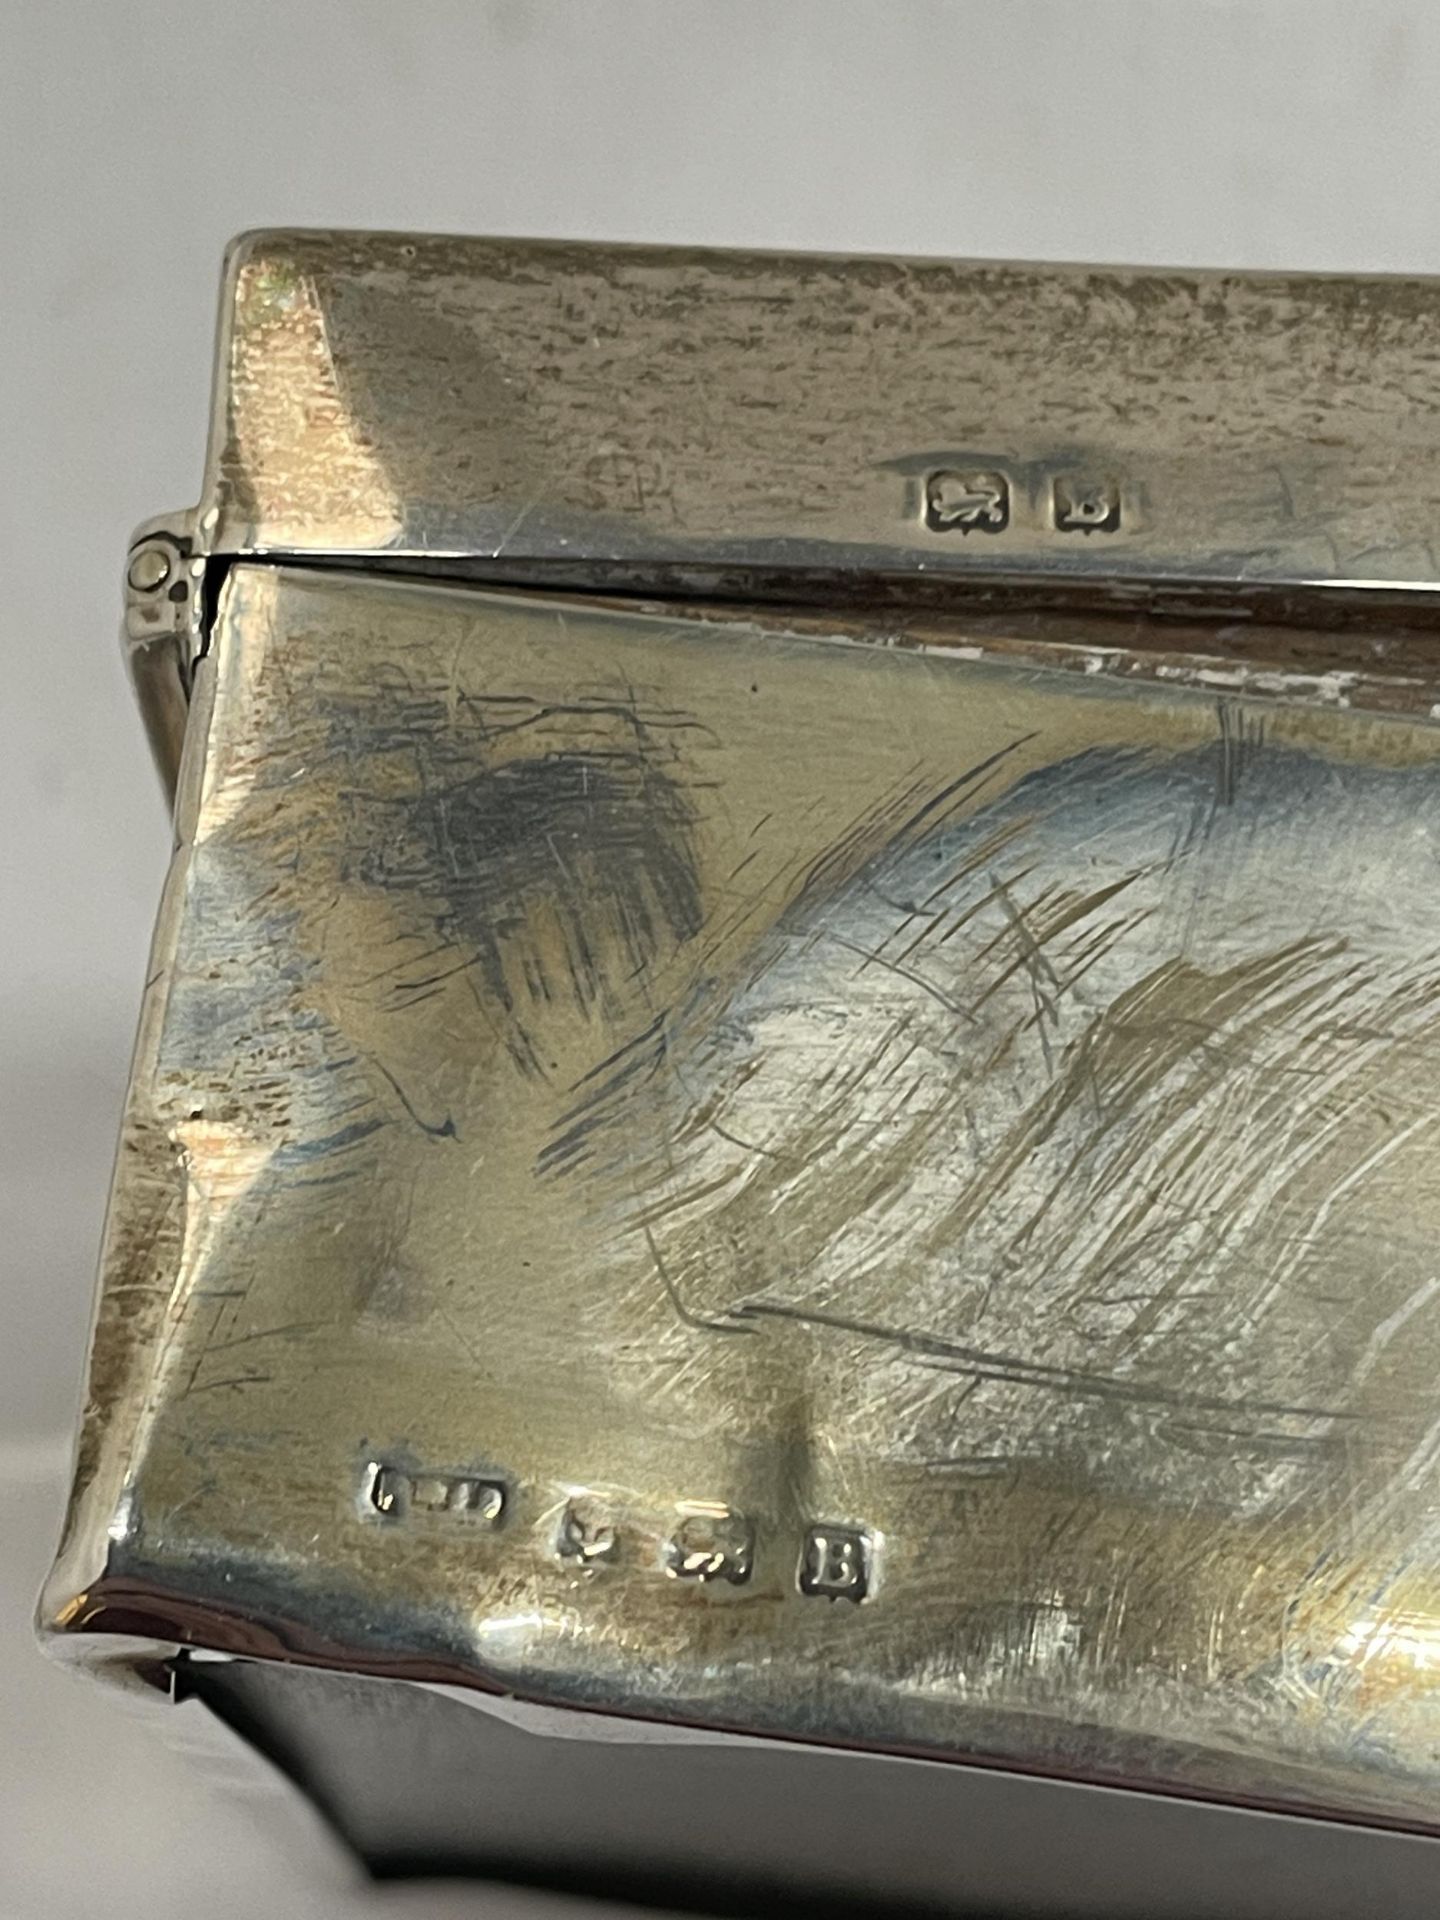 A HALLMARKED BIRMINGHAM SILVER BOX ENGRAVED 9TH APRIL 1929 GROSS WEIGHT 362 GRAMS - Image 4 of 4